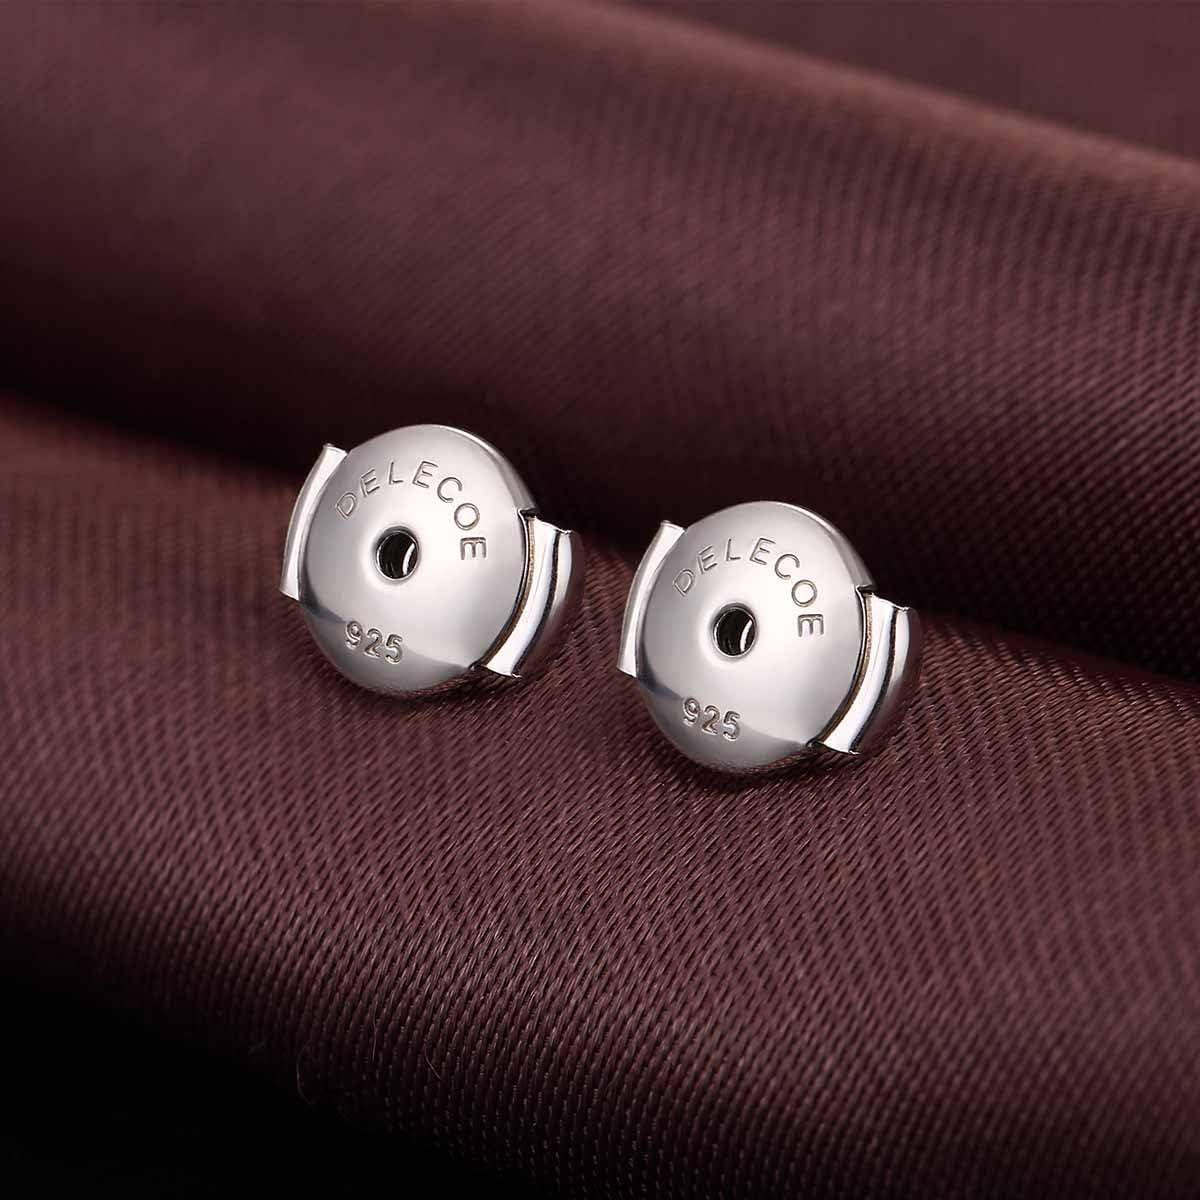 Siwoms 2 Pairs Silver Locking Earring Backs Secure for Diamond Studs, Hypoallergenic Replacements Earring Backings for Notched Post